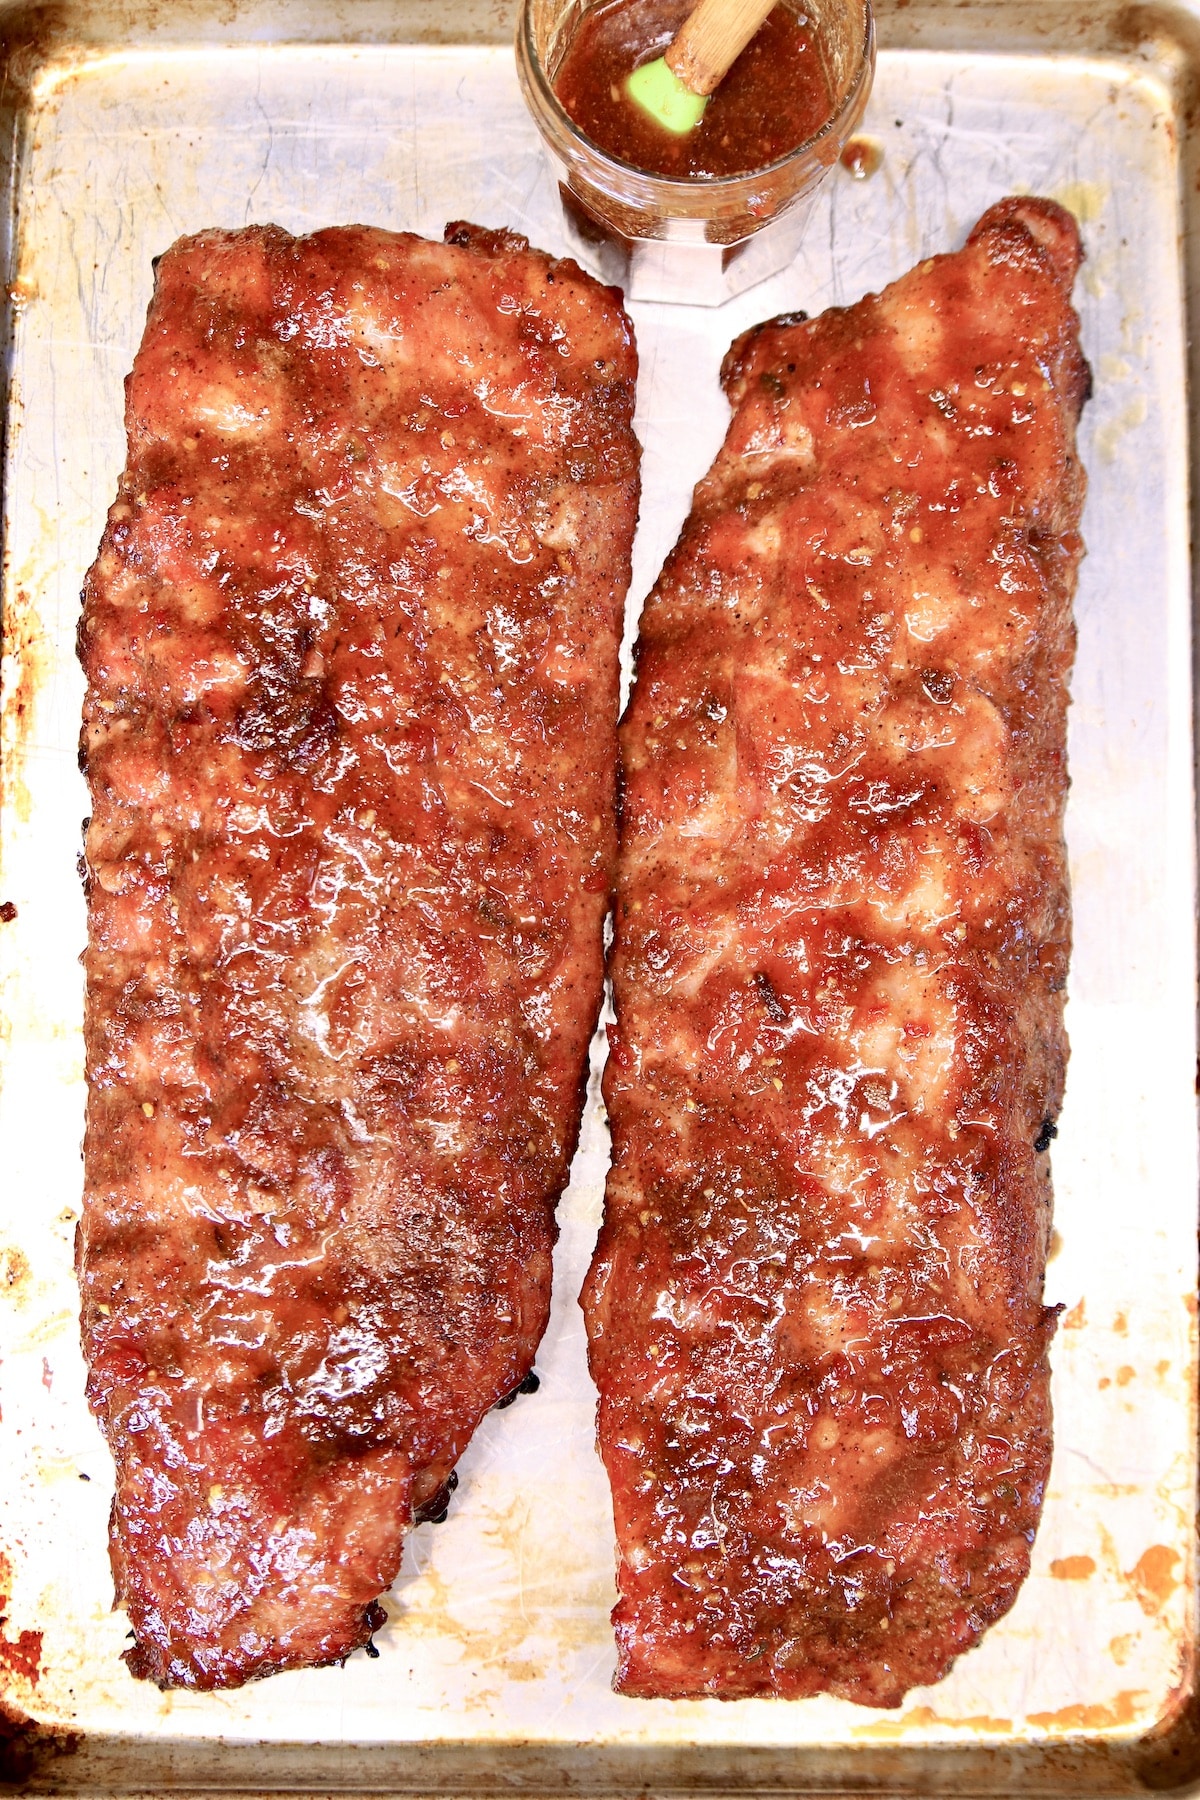 2 racks grilled baby back ribs on a baking sheet with jar of sauce.